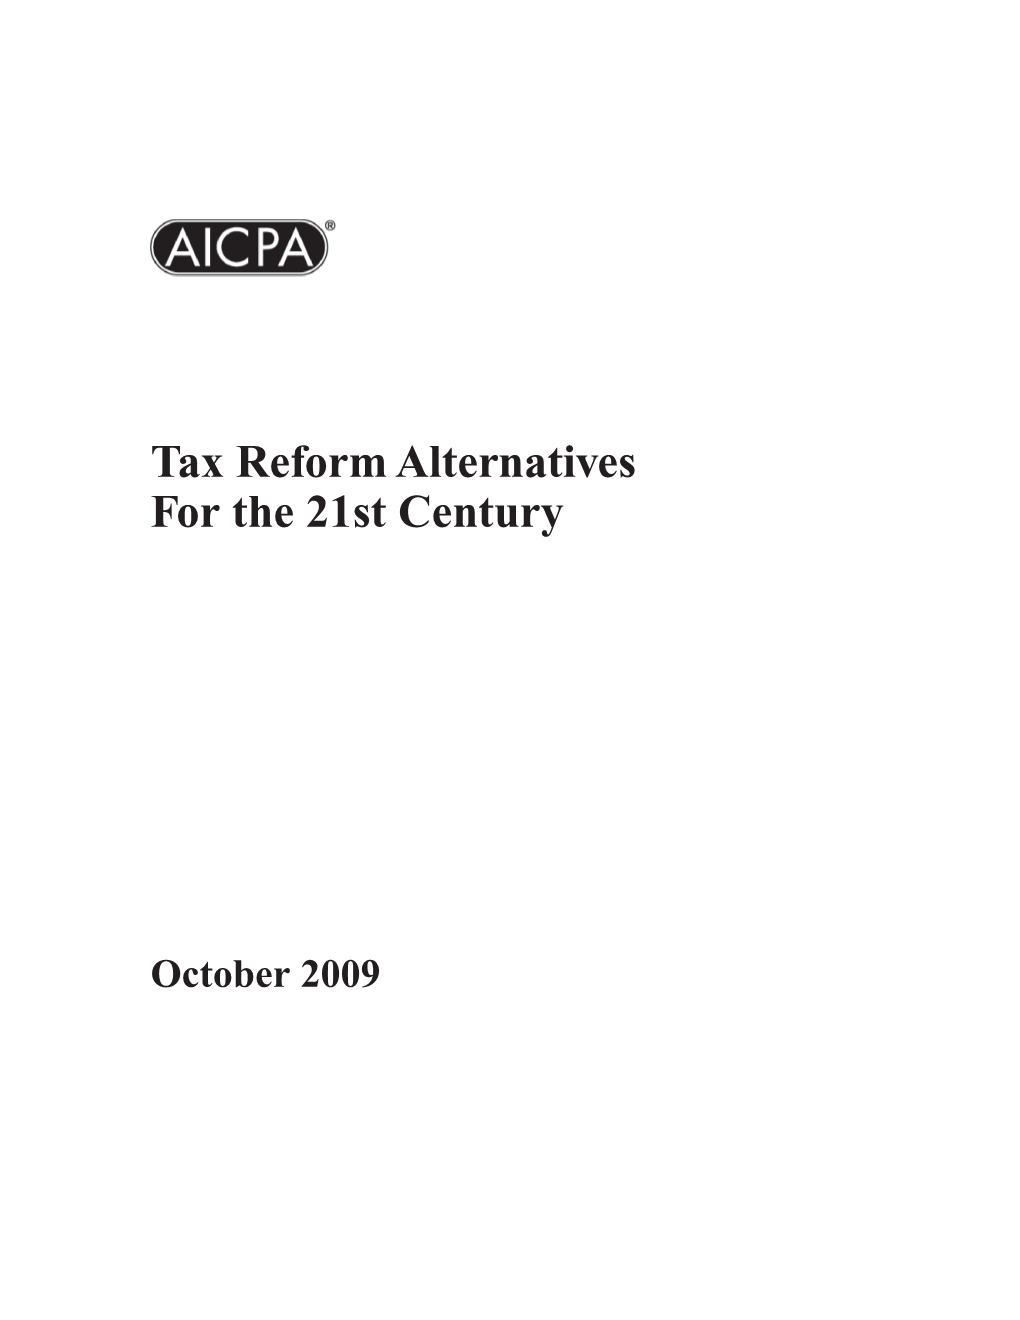 Tax Reform Alternatives for the 21St Century